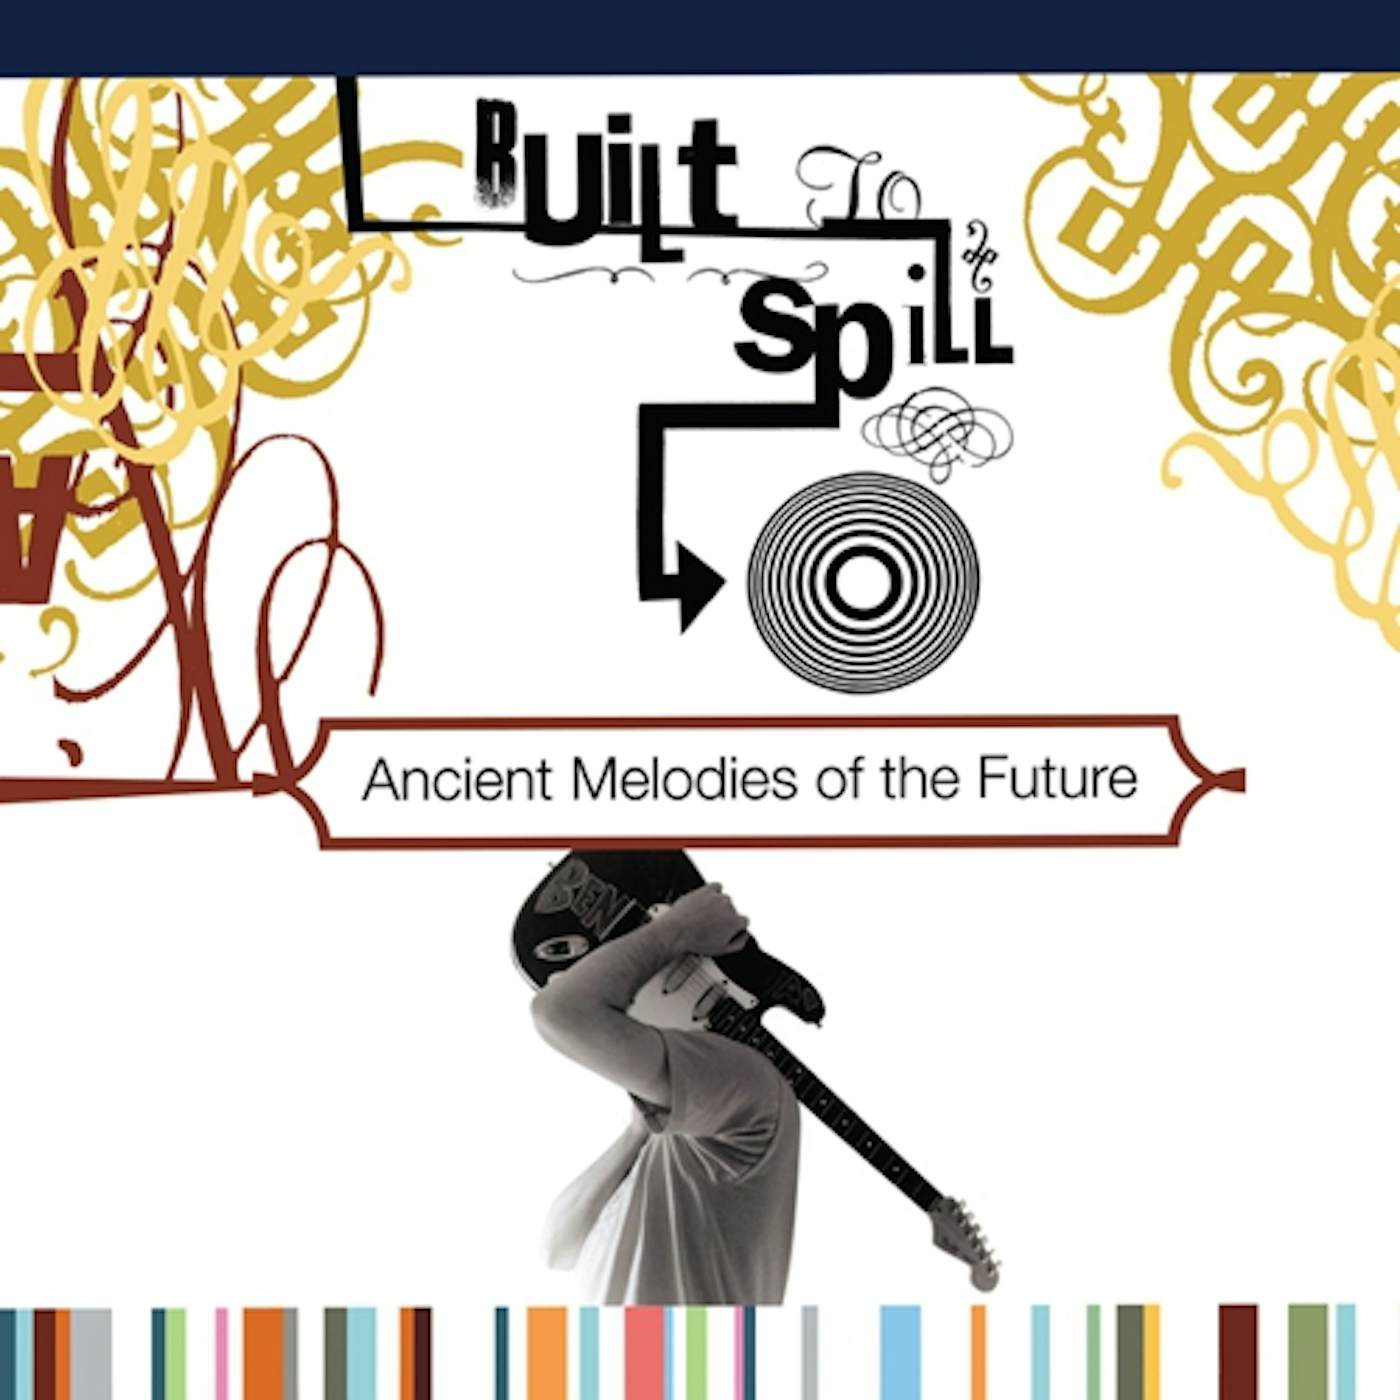 Built To Spill Ancient Melodies Of The Future Vinyl Record